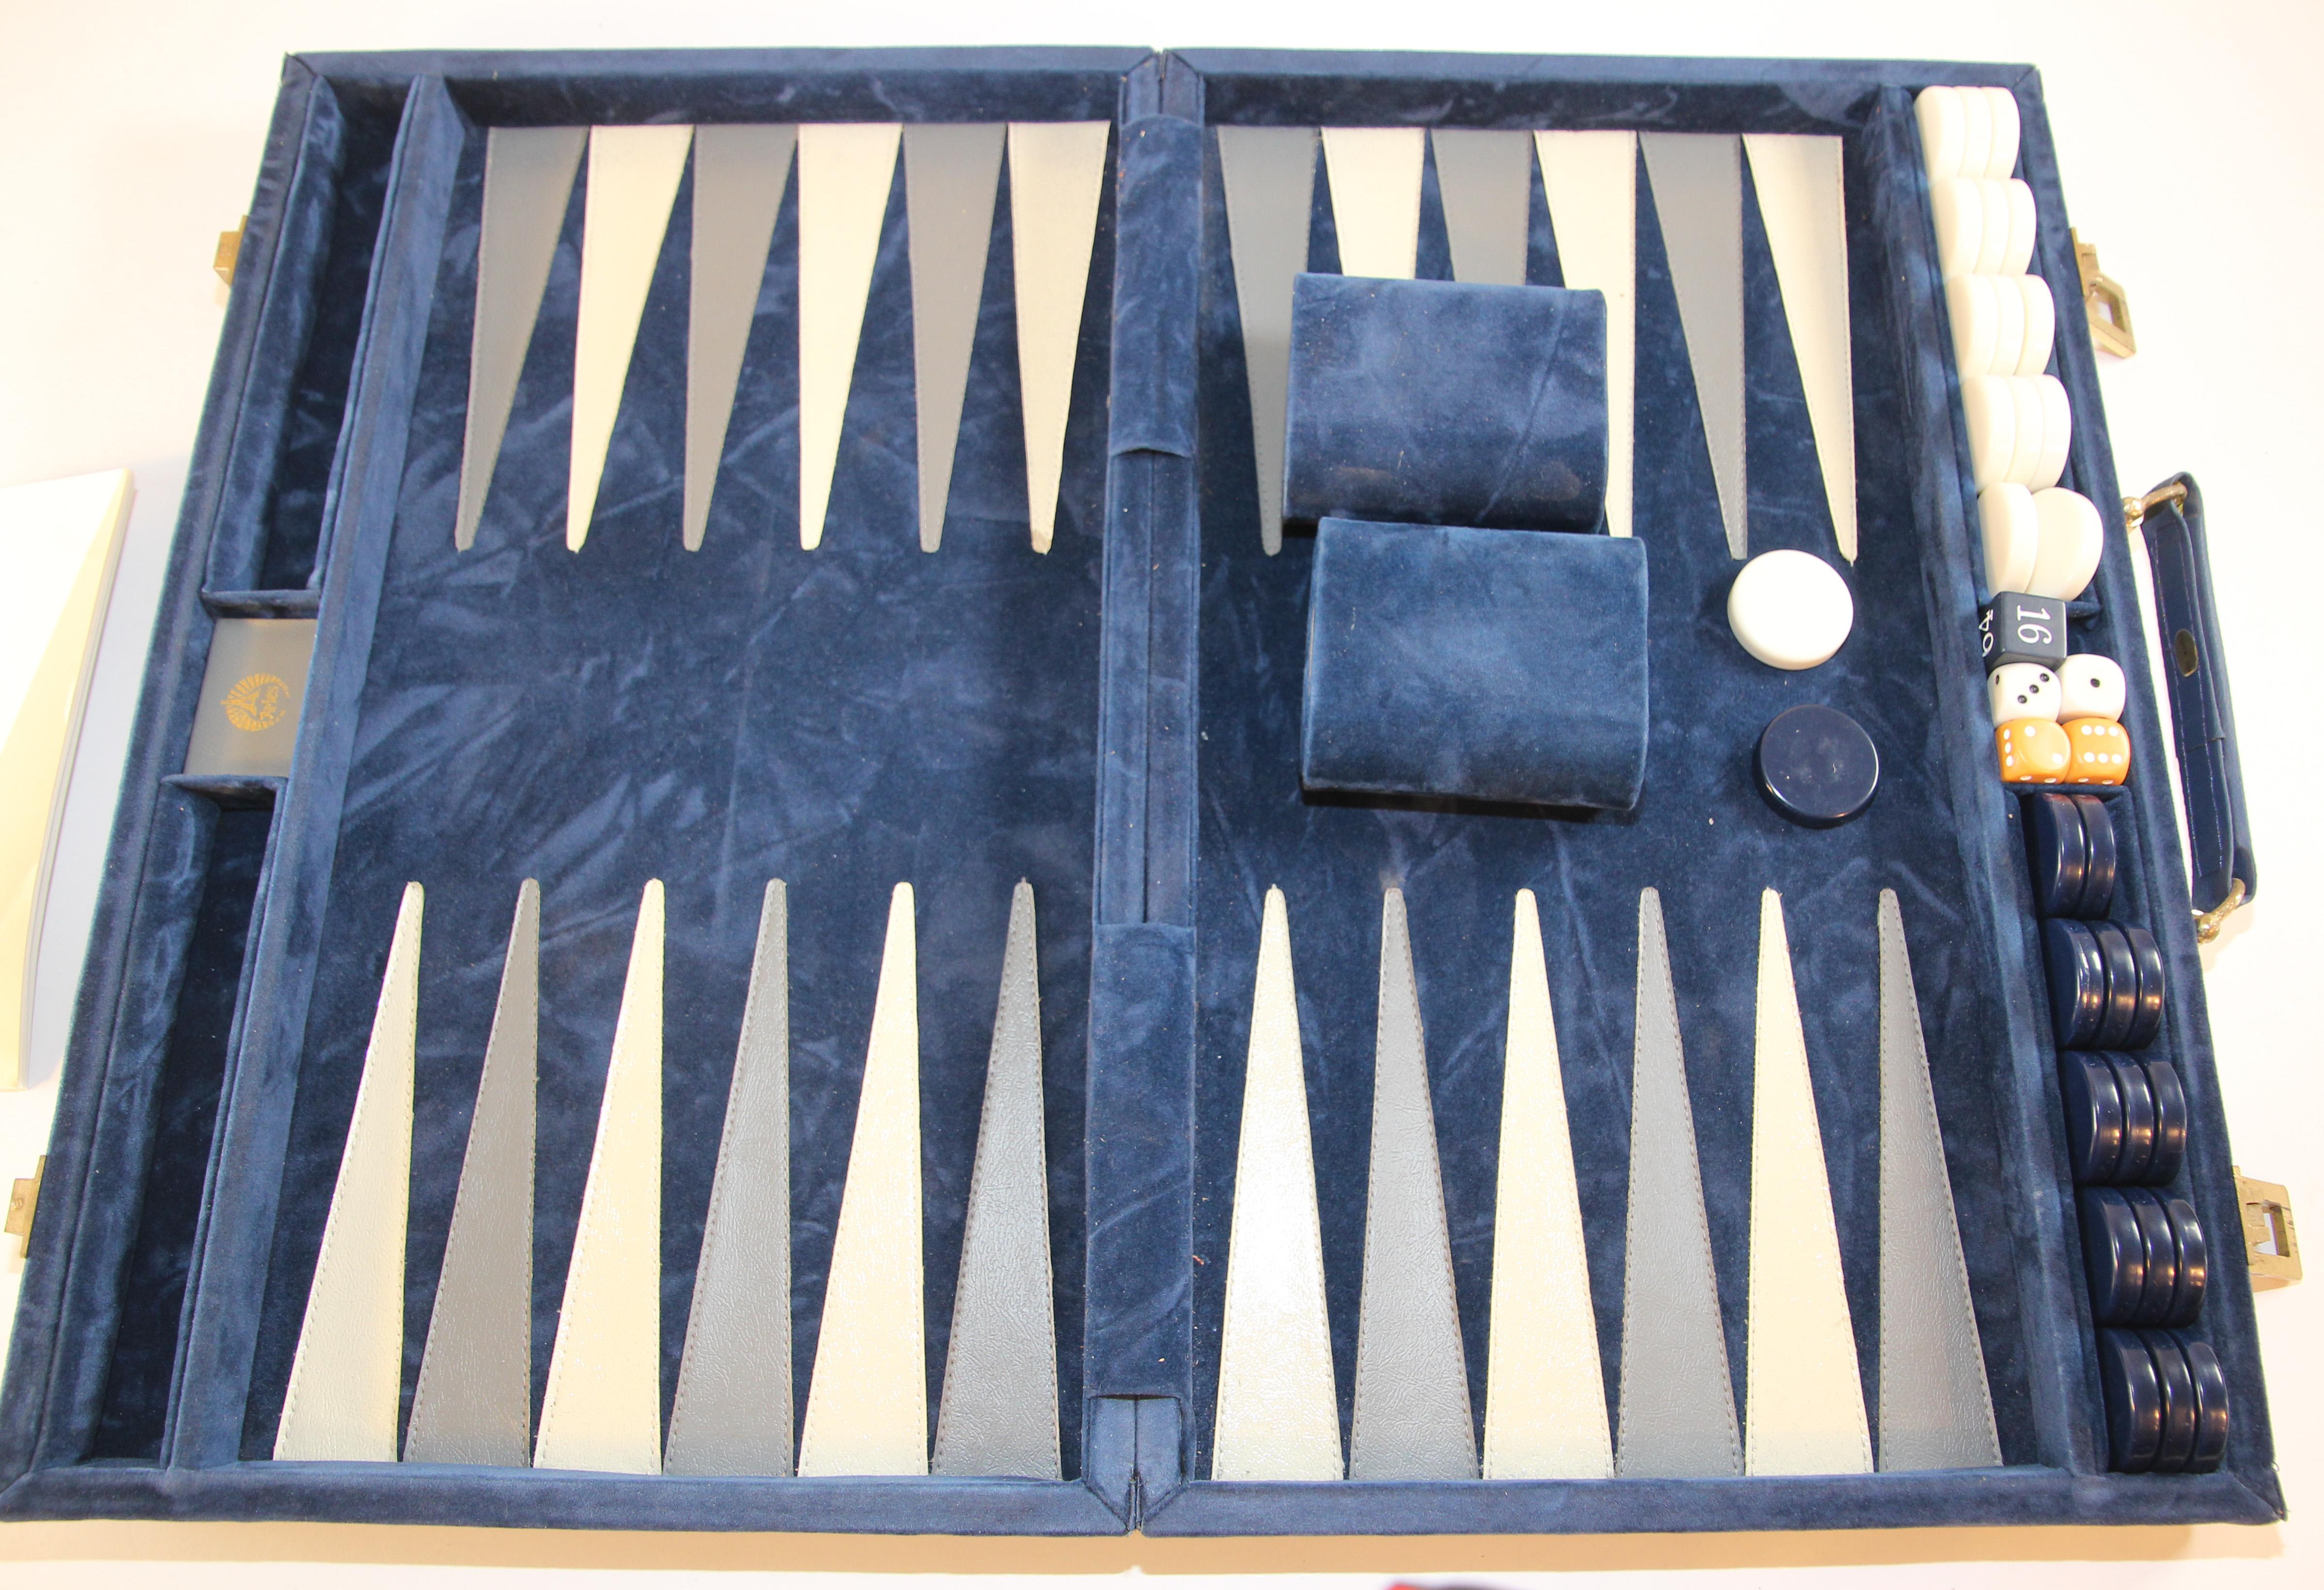 American Vintage Aries Backgammon Set in a Blue Briefcase 1970s 